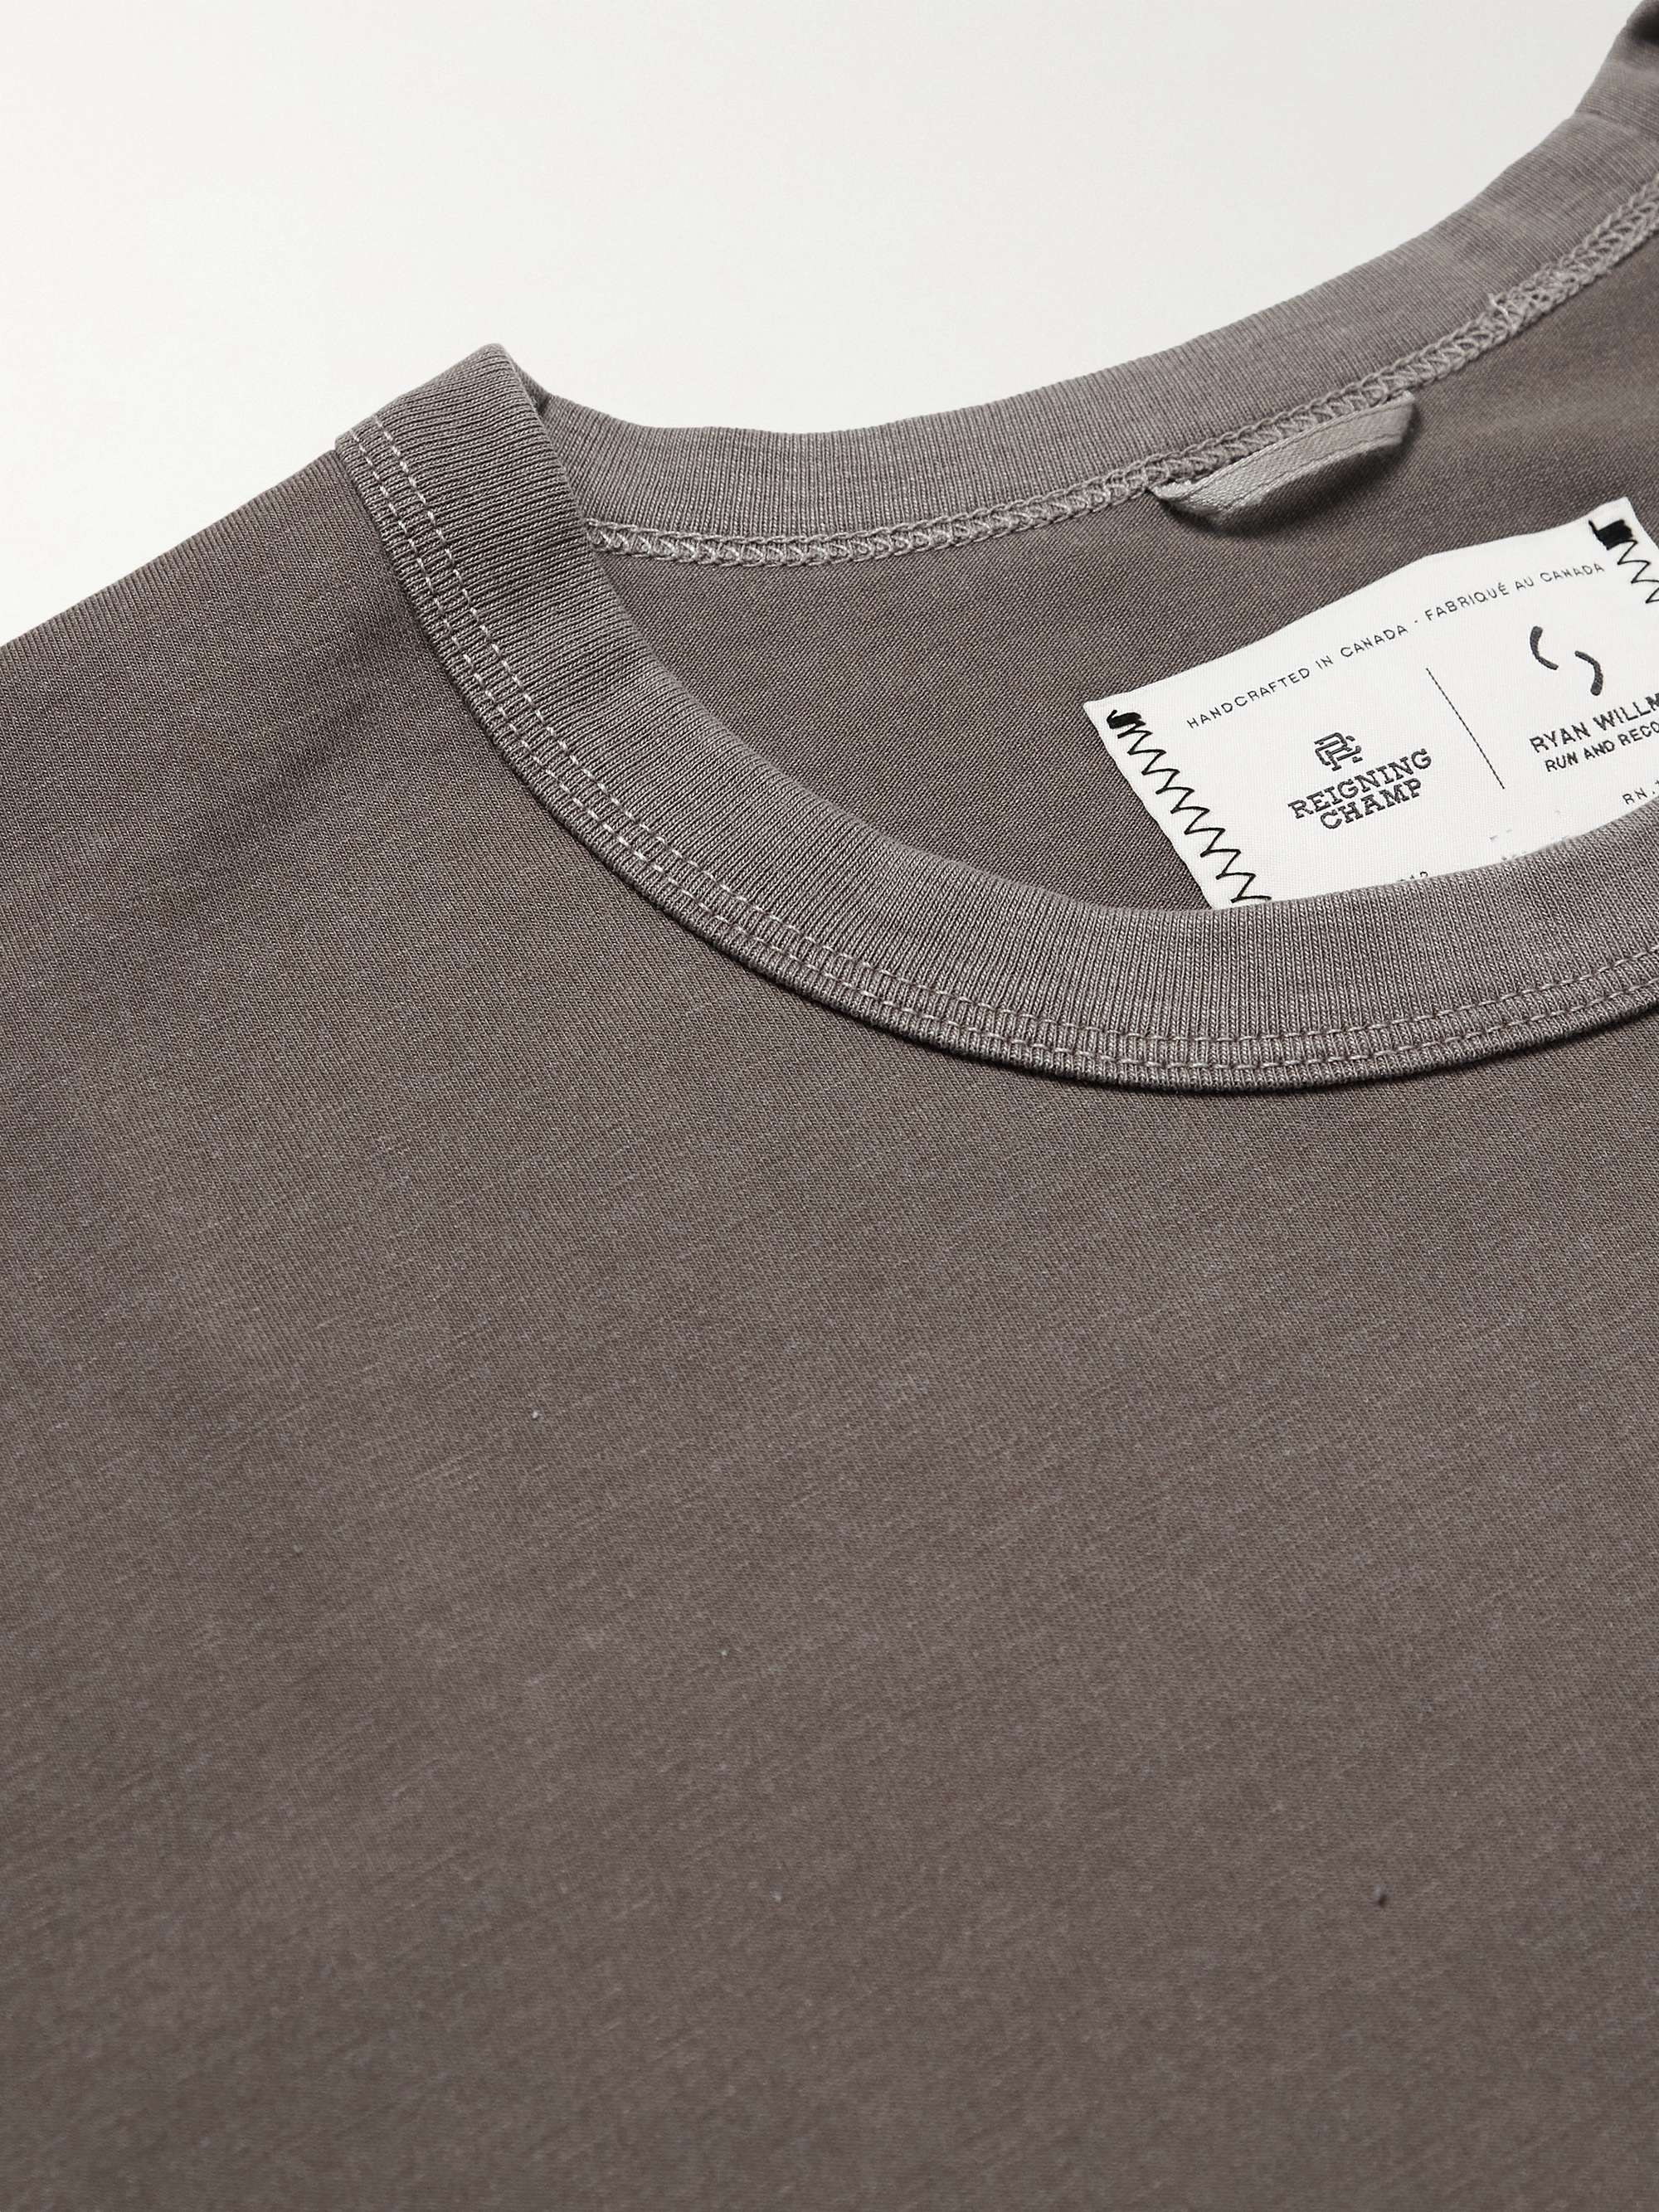 REIGNING CHAMP + Ryan Willms Garment-Dyed Printed Cotton-Blend Jersey T-Shirt